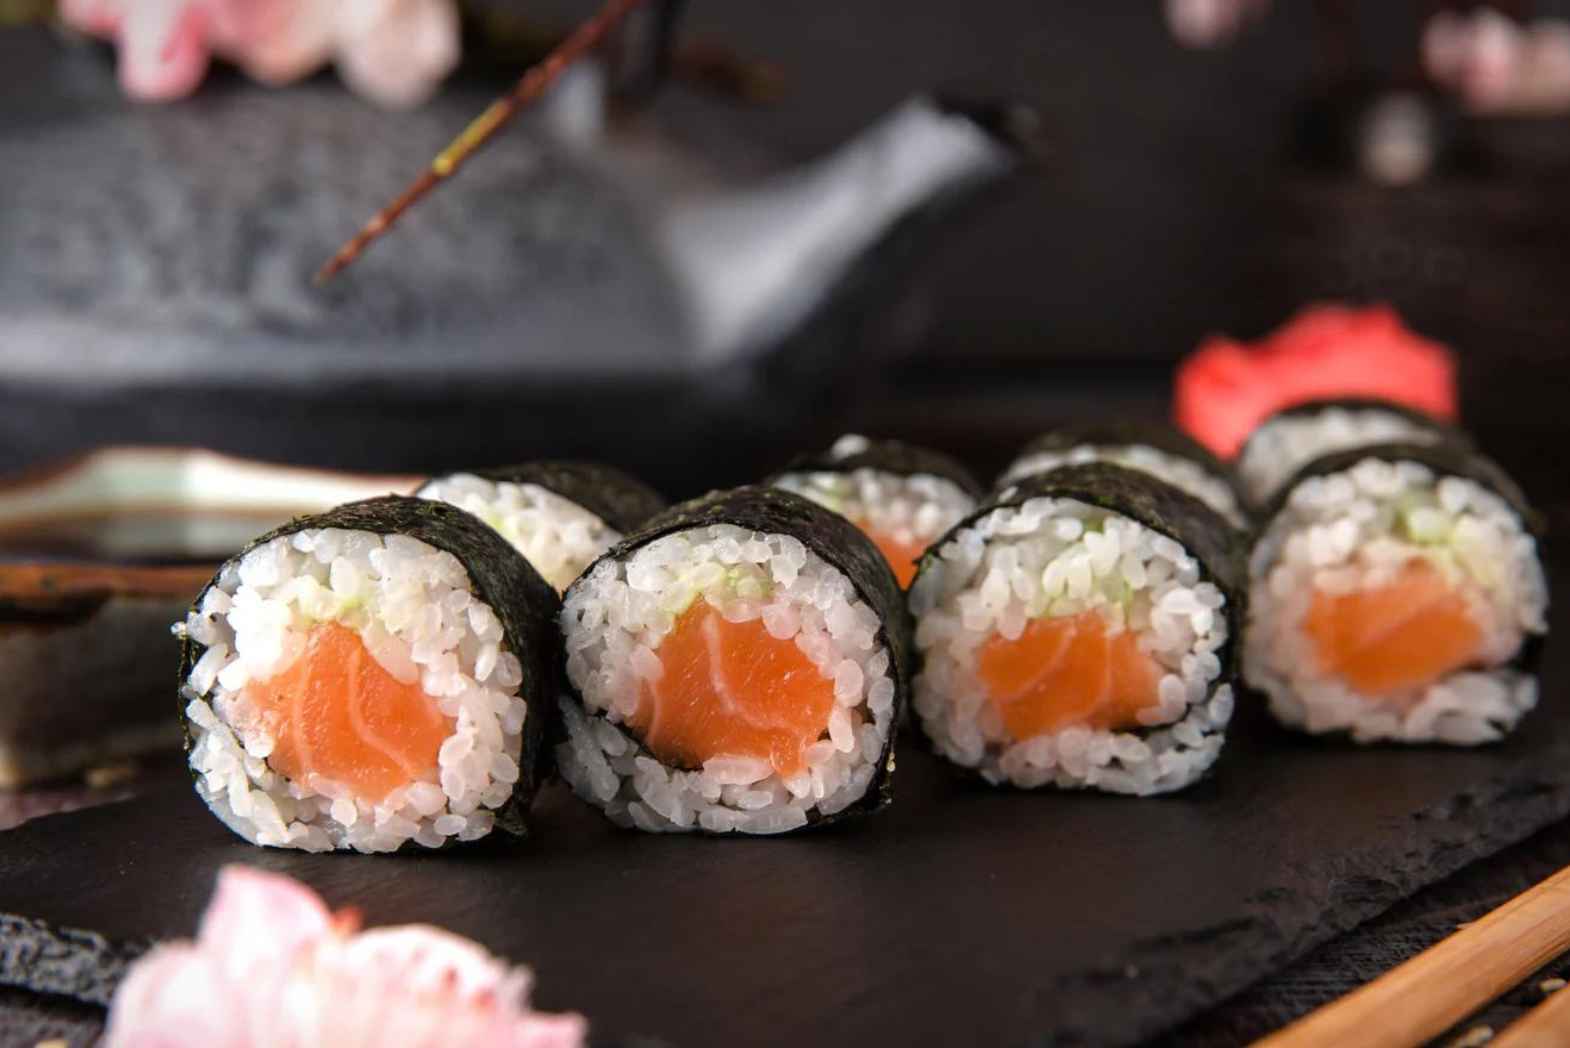 Compare prices for Maki across all European  stores